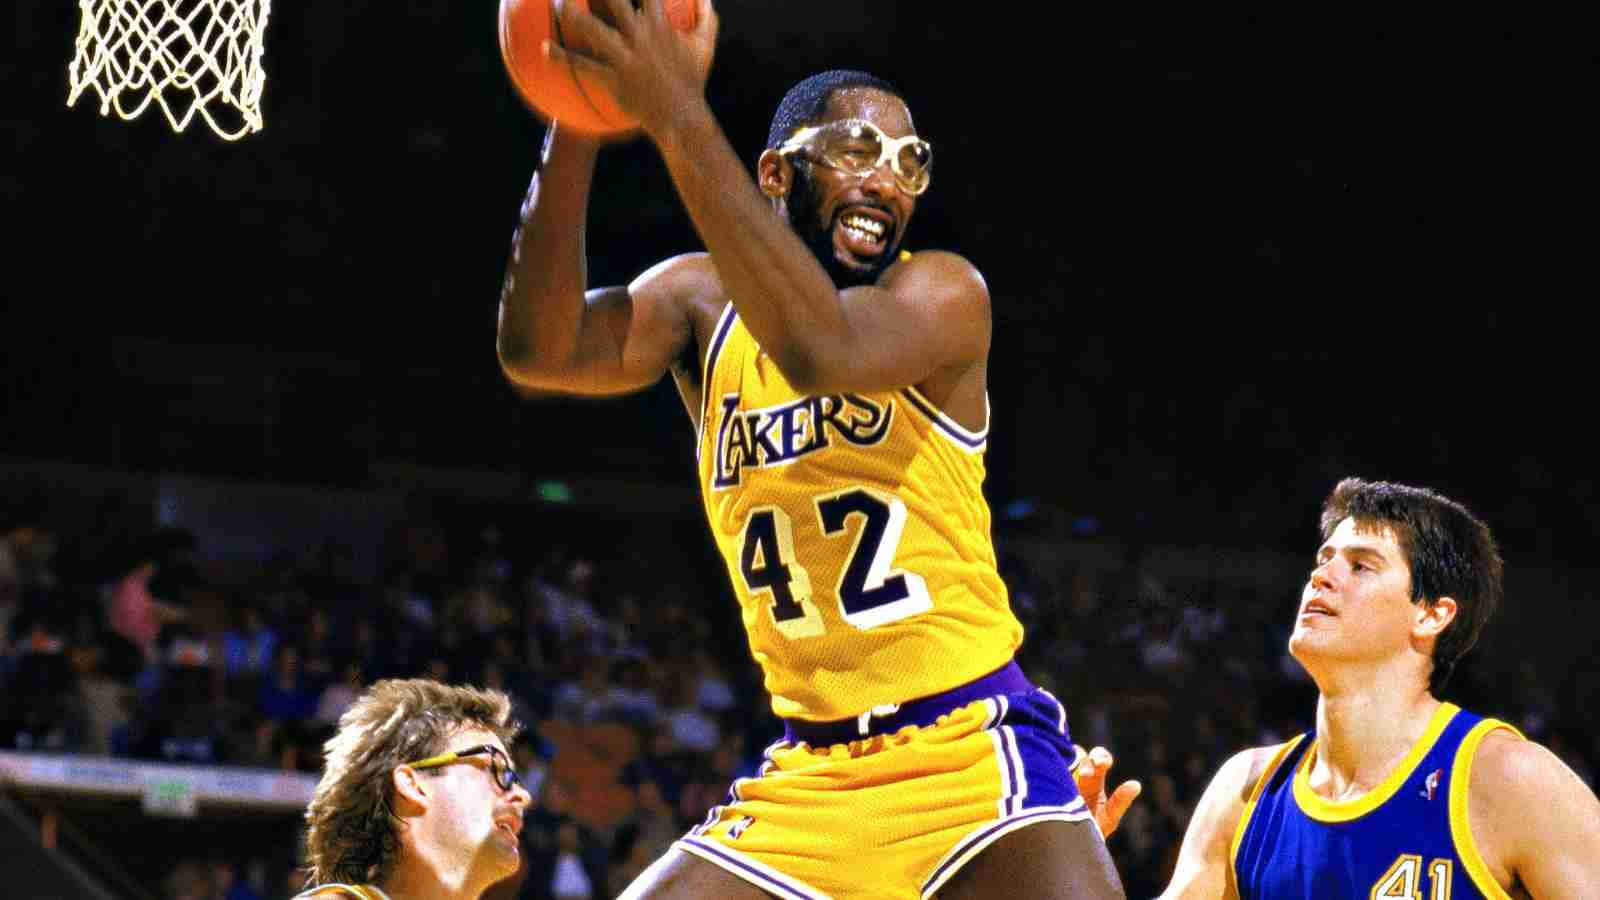 Download Alex English Against James Worthy Lakers Vs. Nuggets